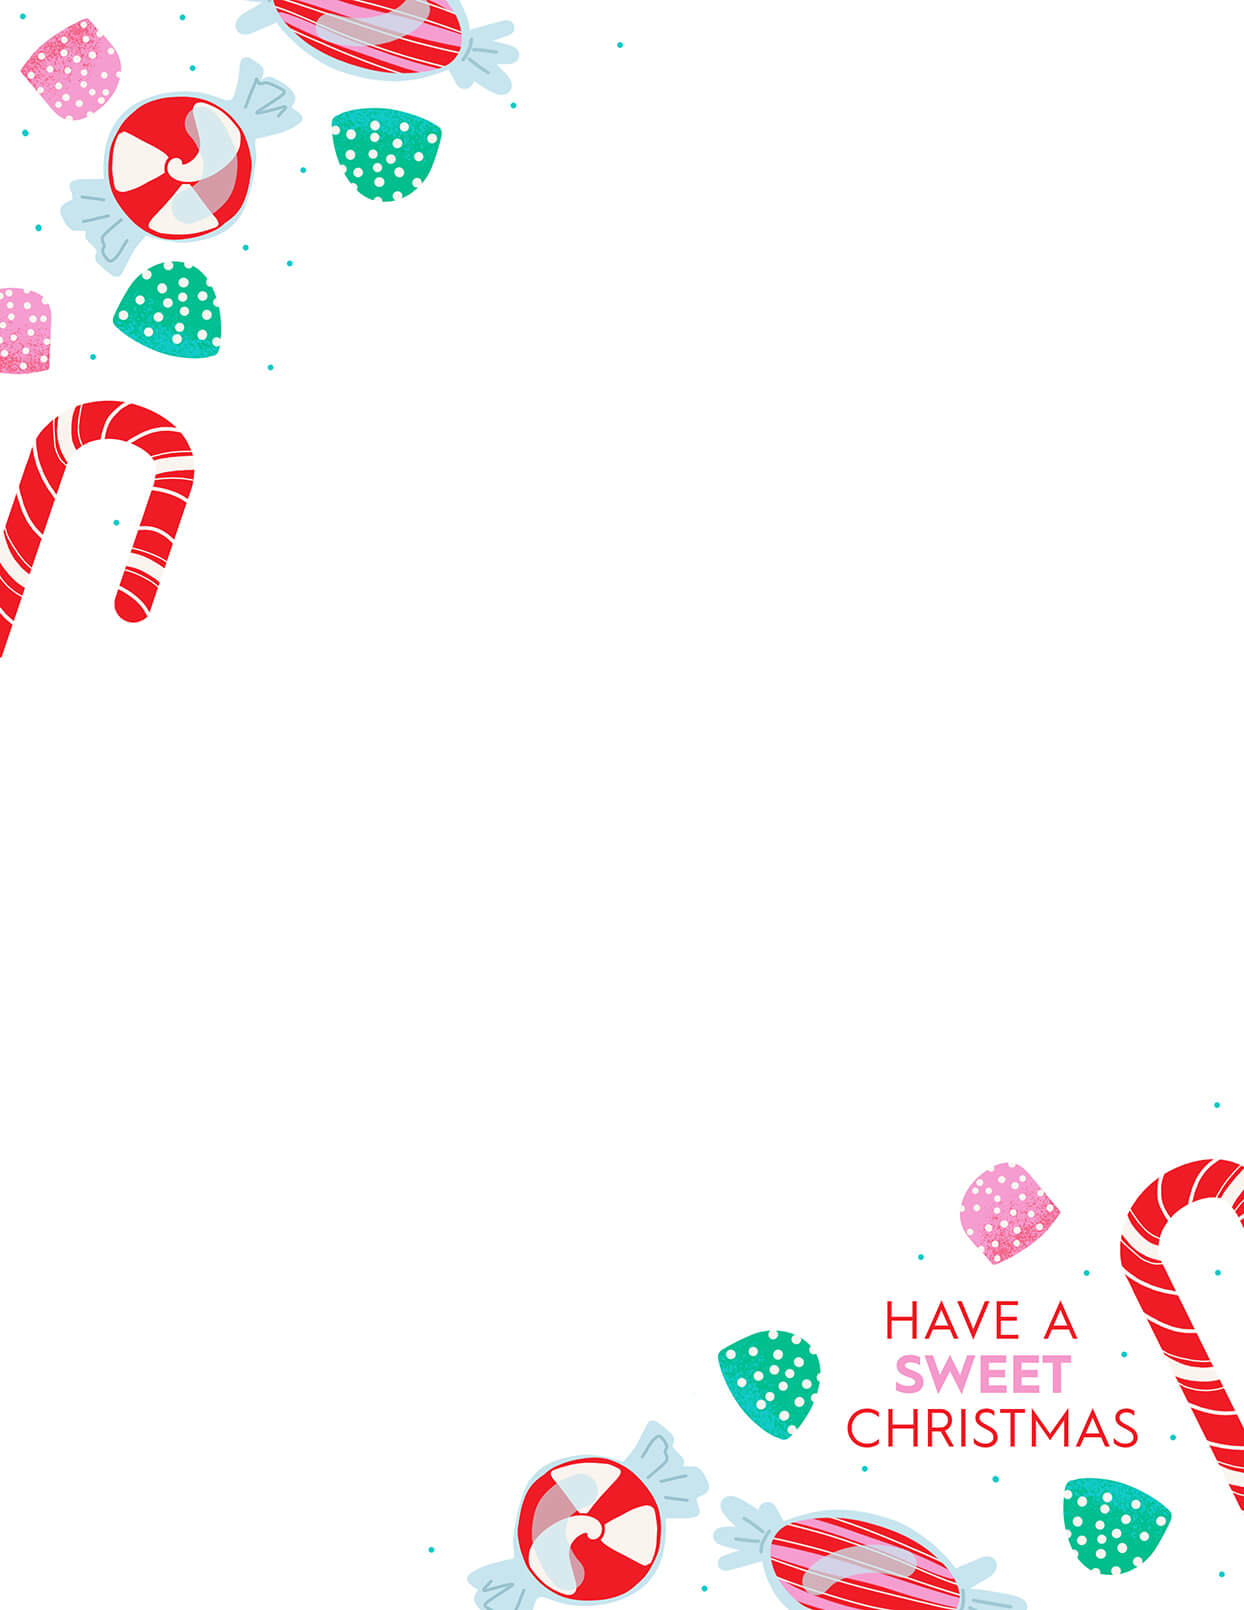 33 Free Templates To Help You Send Holiday Cheer Intended For Christmas Note Card Templates